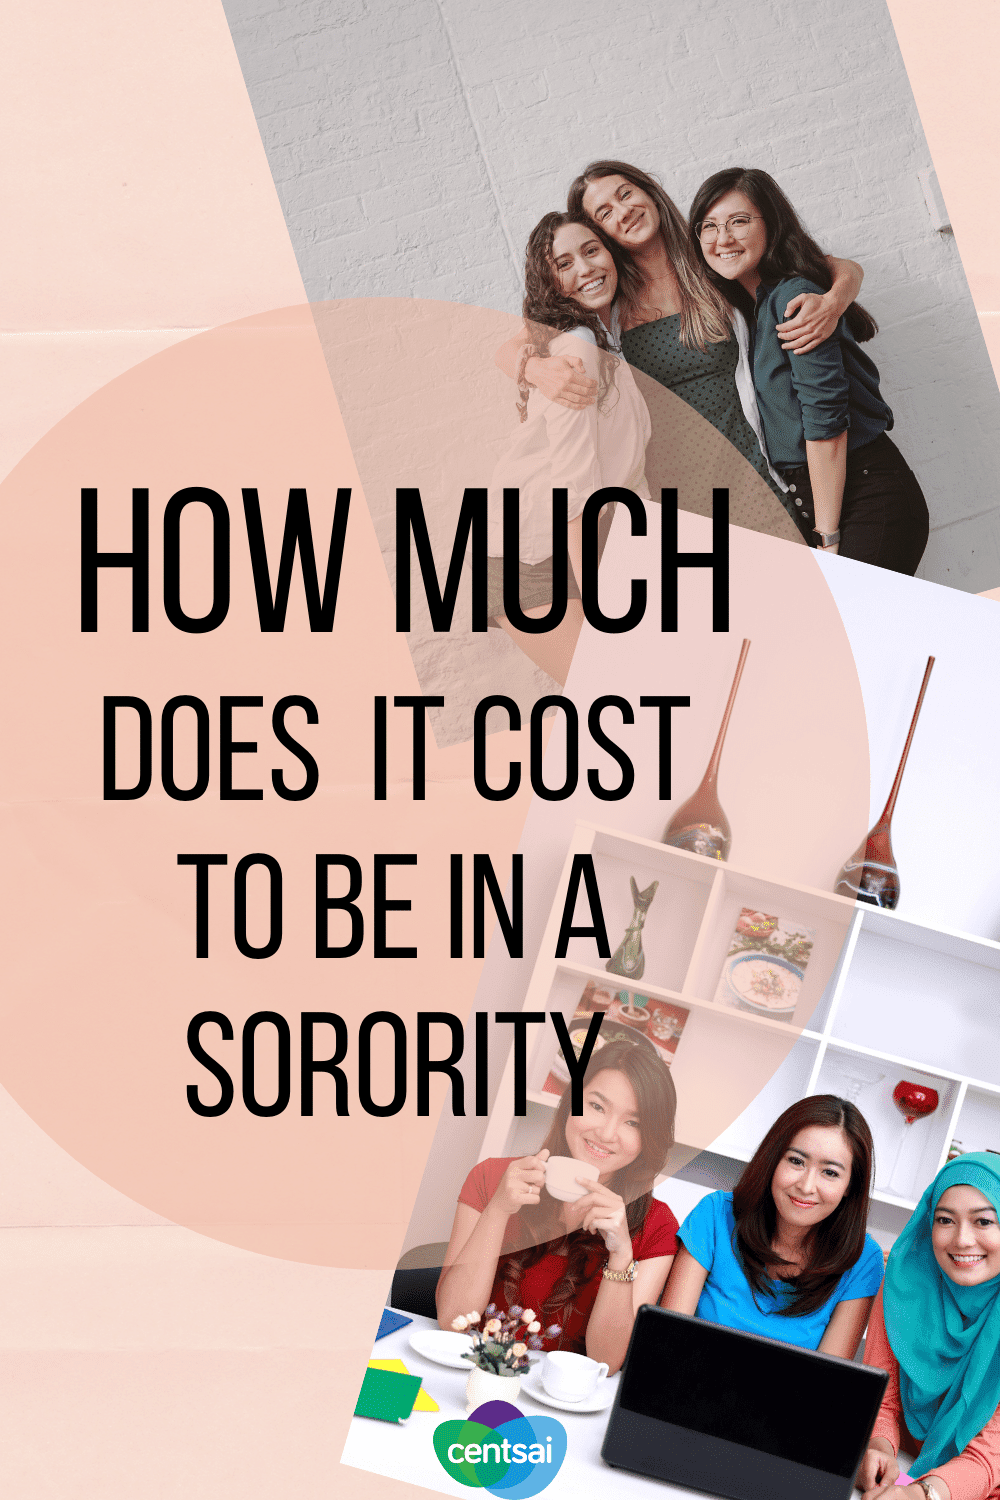 How Much Does It Cost to Be in a Sorority